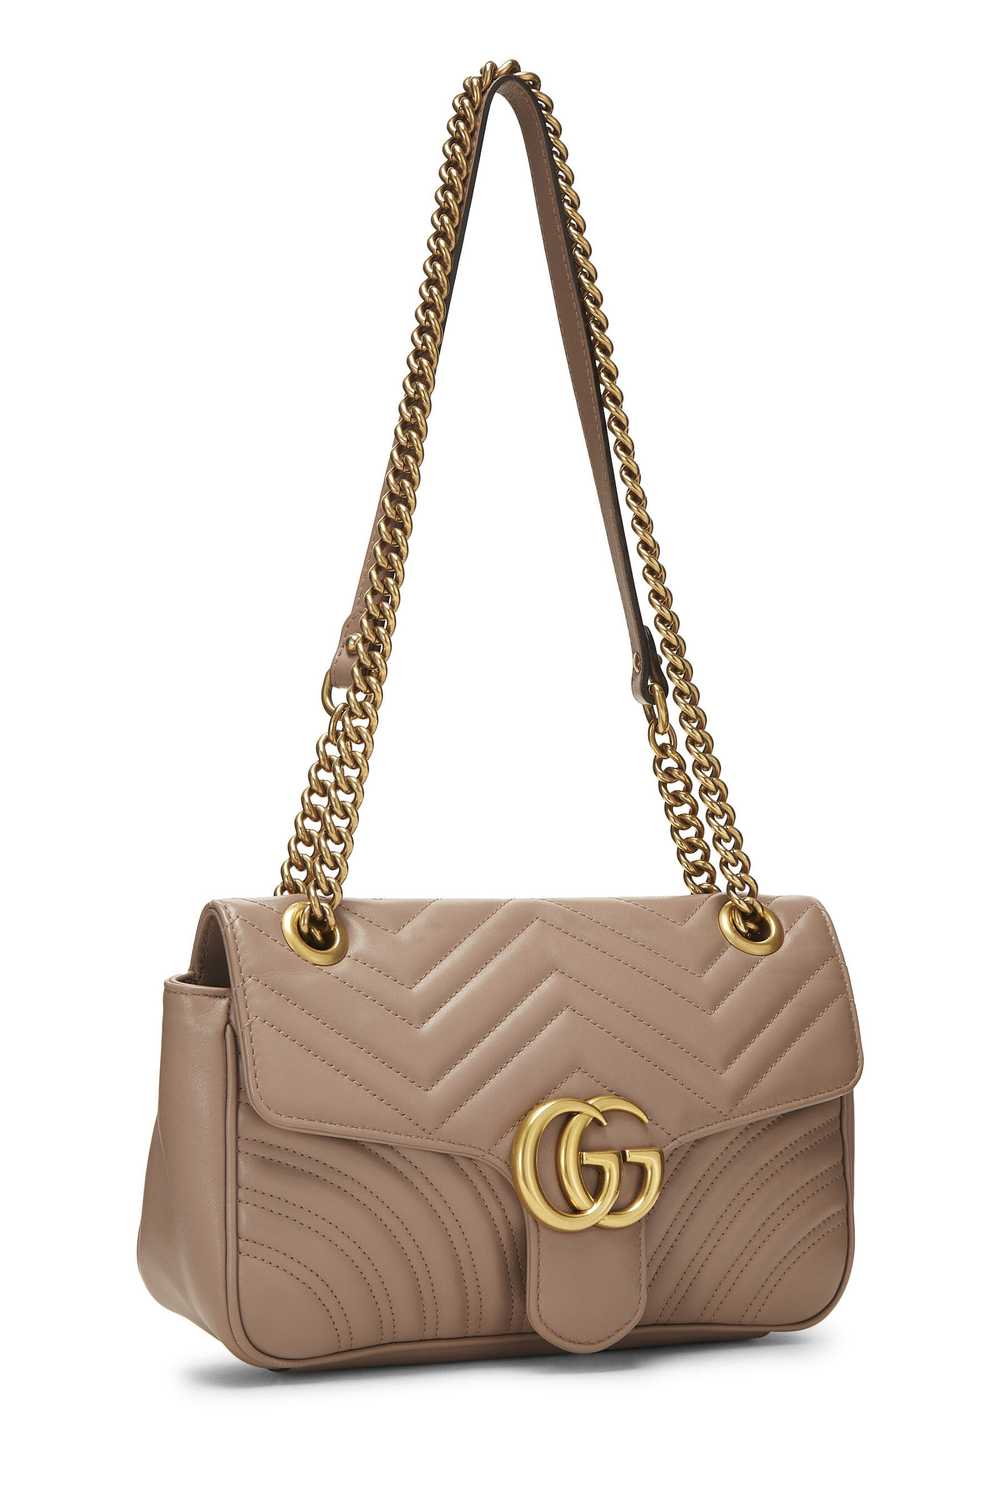 Pink Leather GG Marmont Shoulder Bag Small - image 2